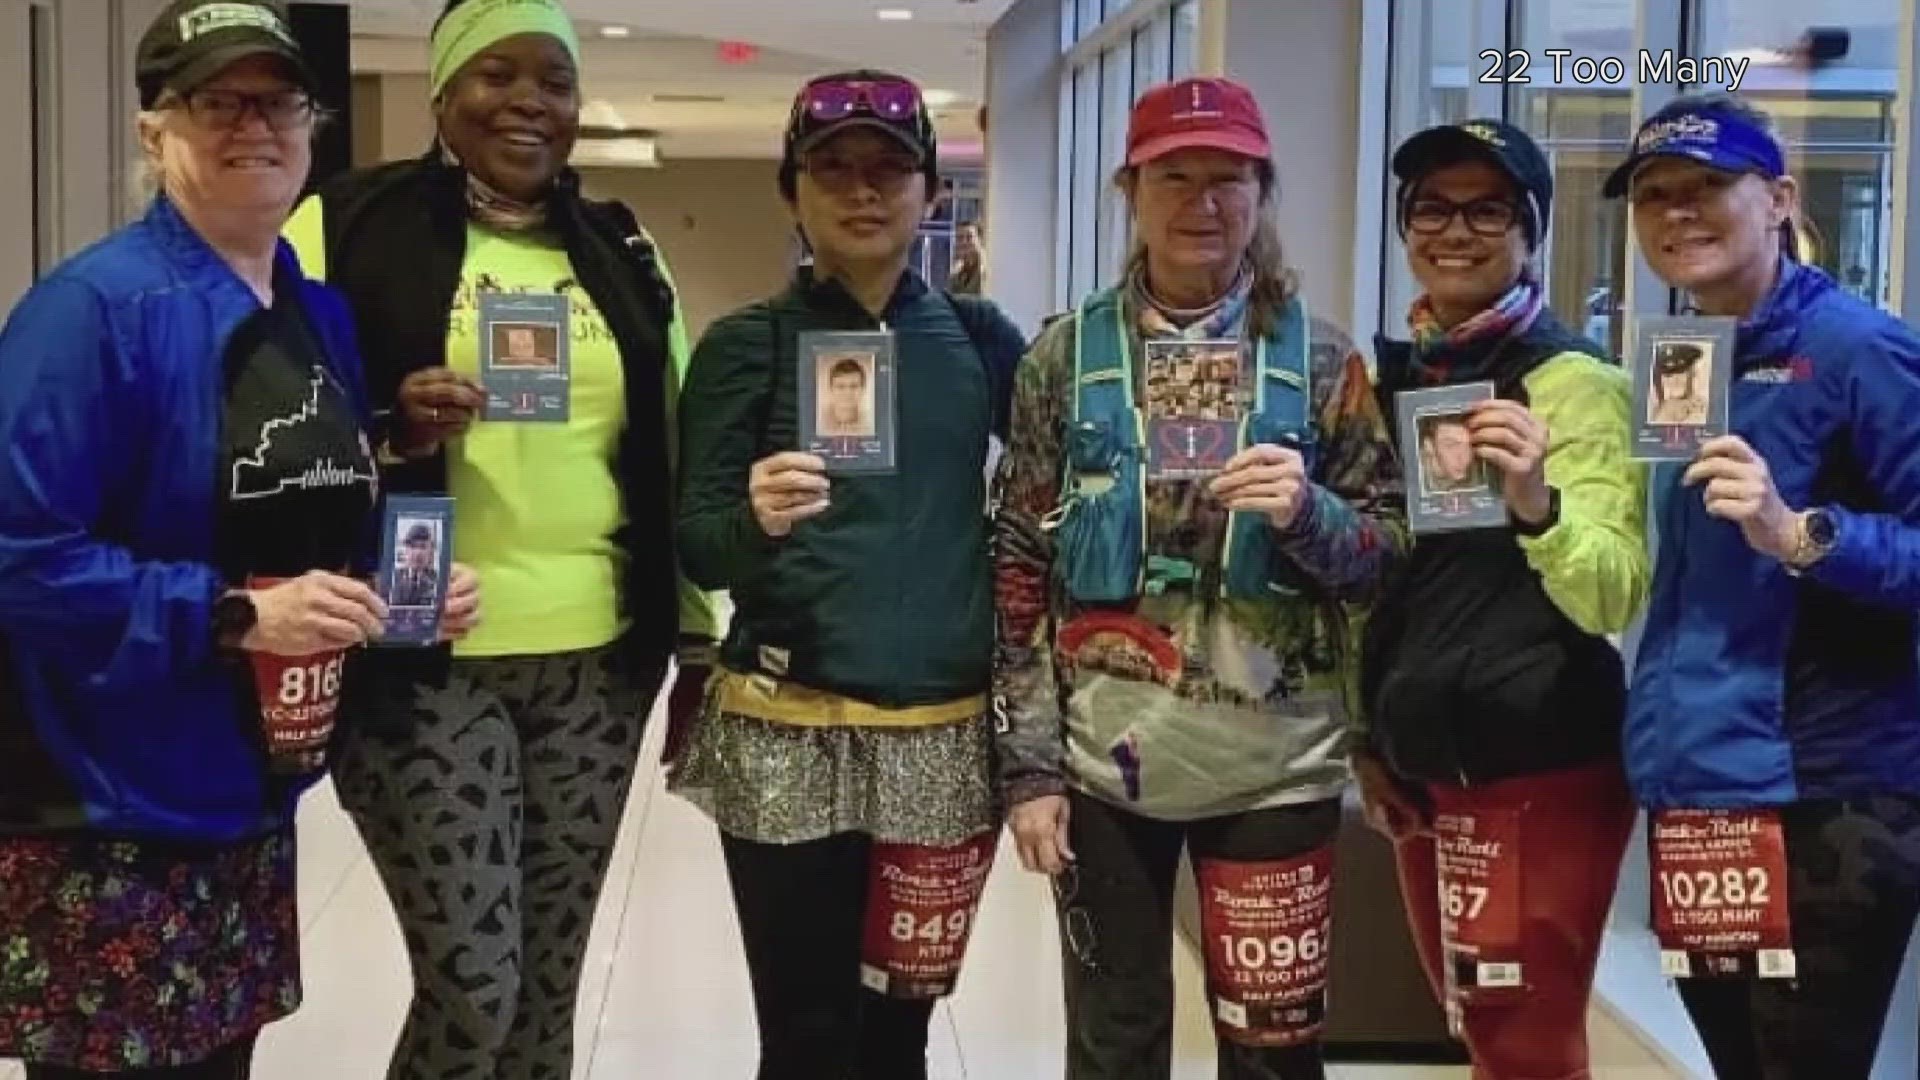 A Silver Spring woman co-founded ’22 Too Many’ and carries photos of deceased veterans while running.